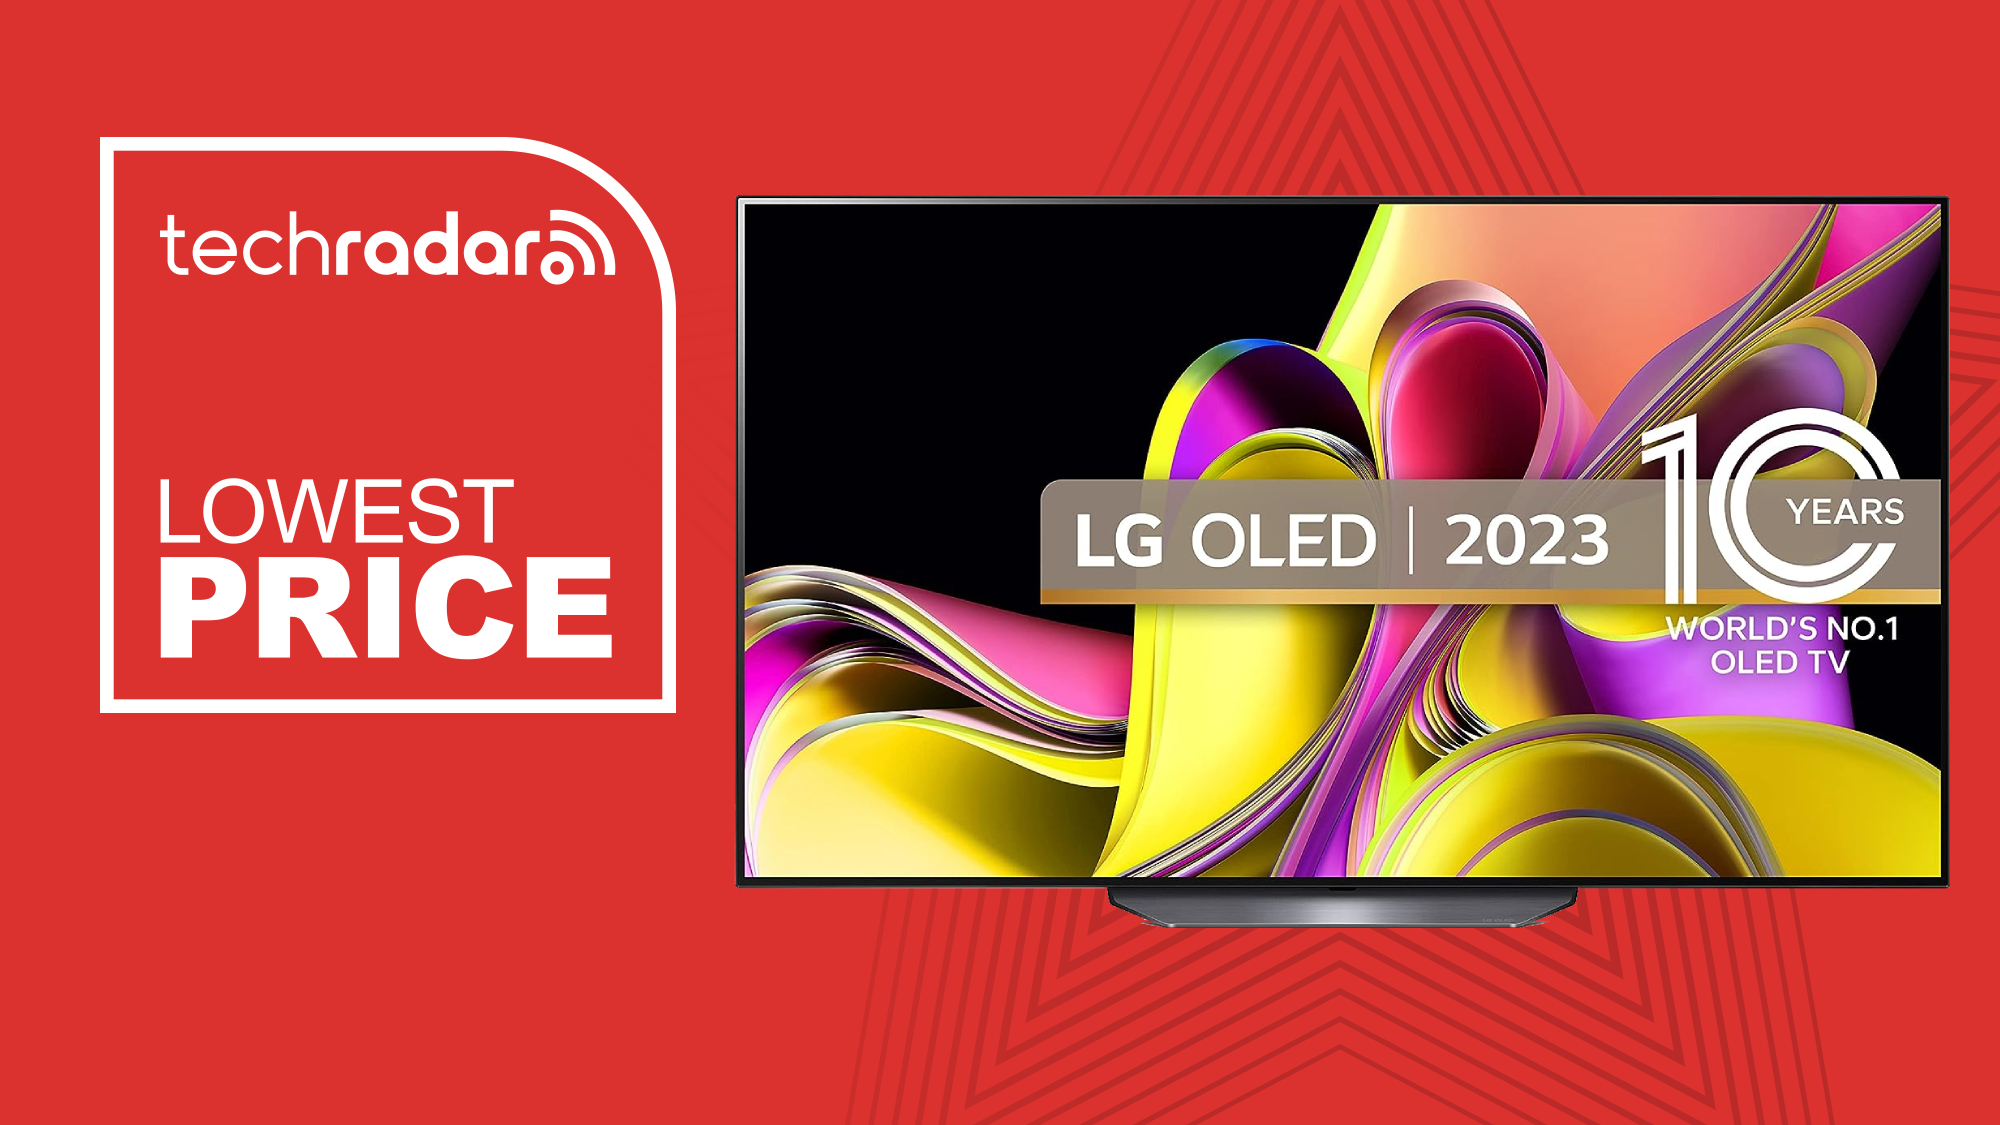 LG B3 OLED review: An amazing value